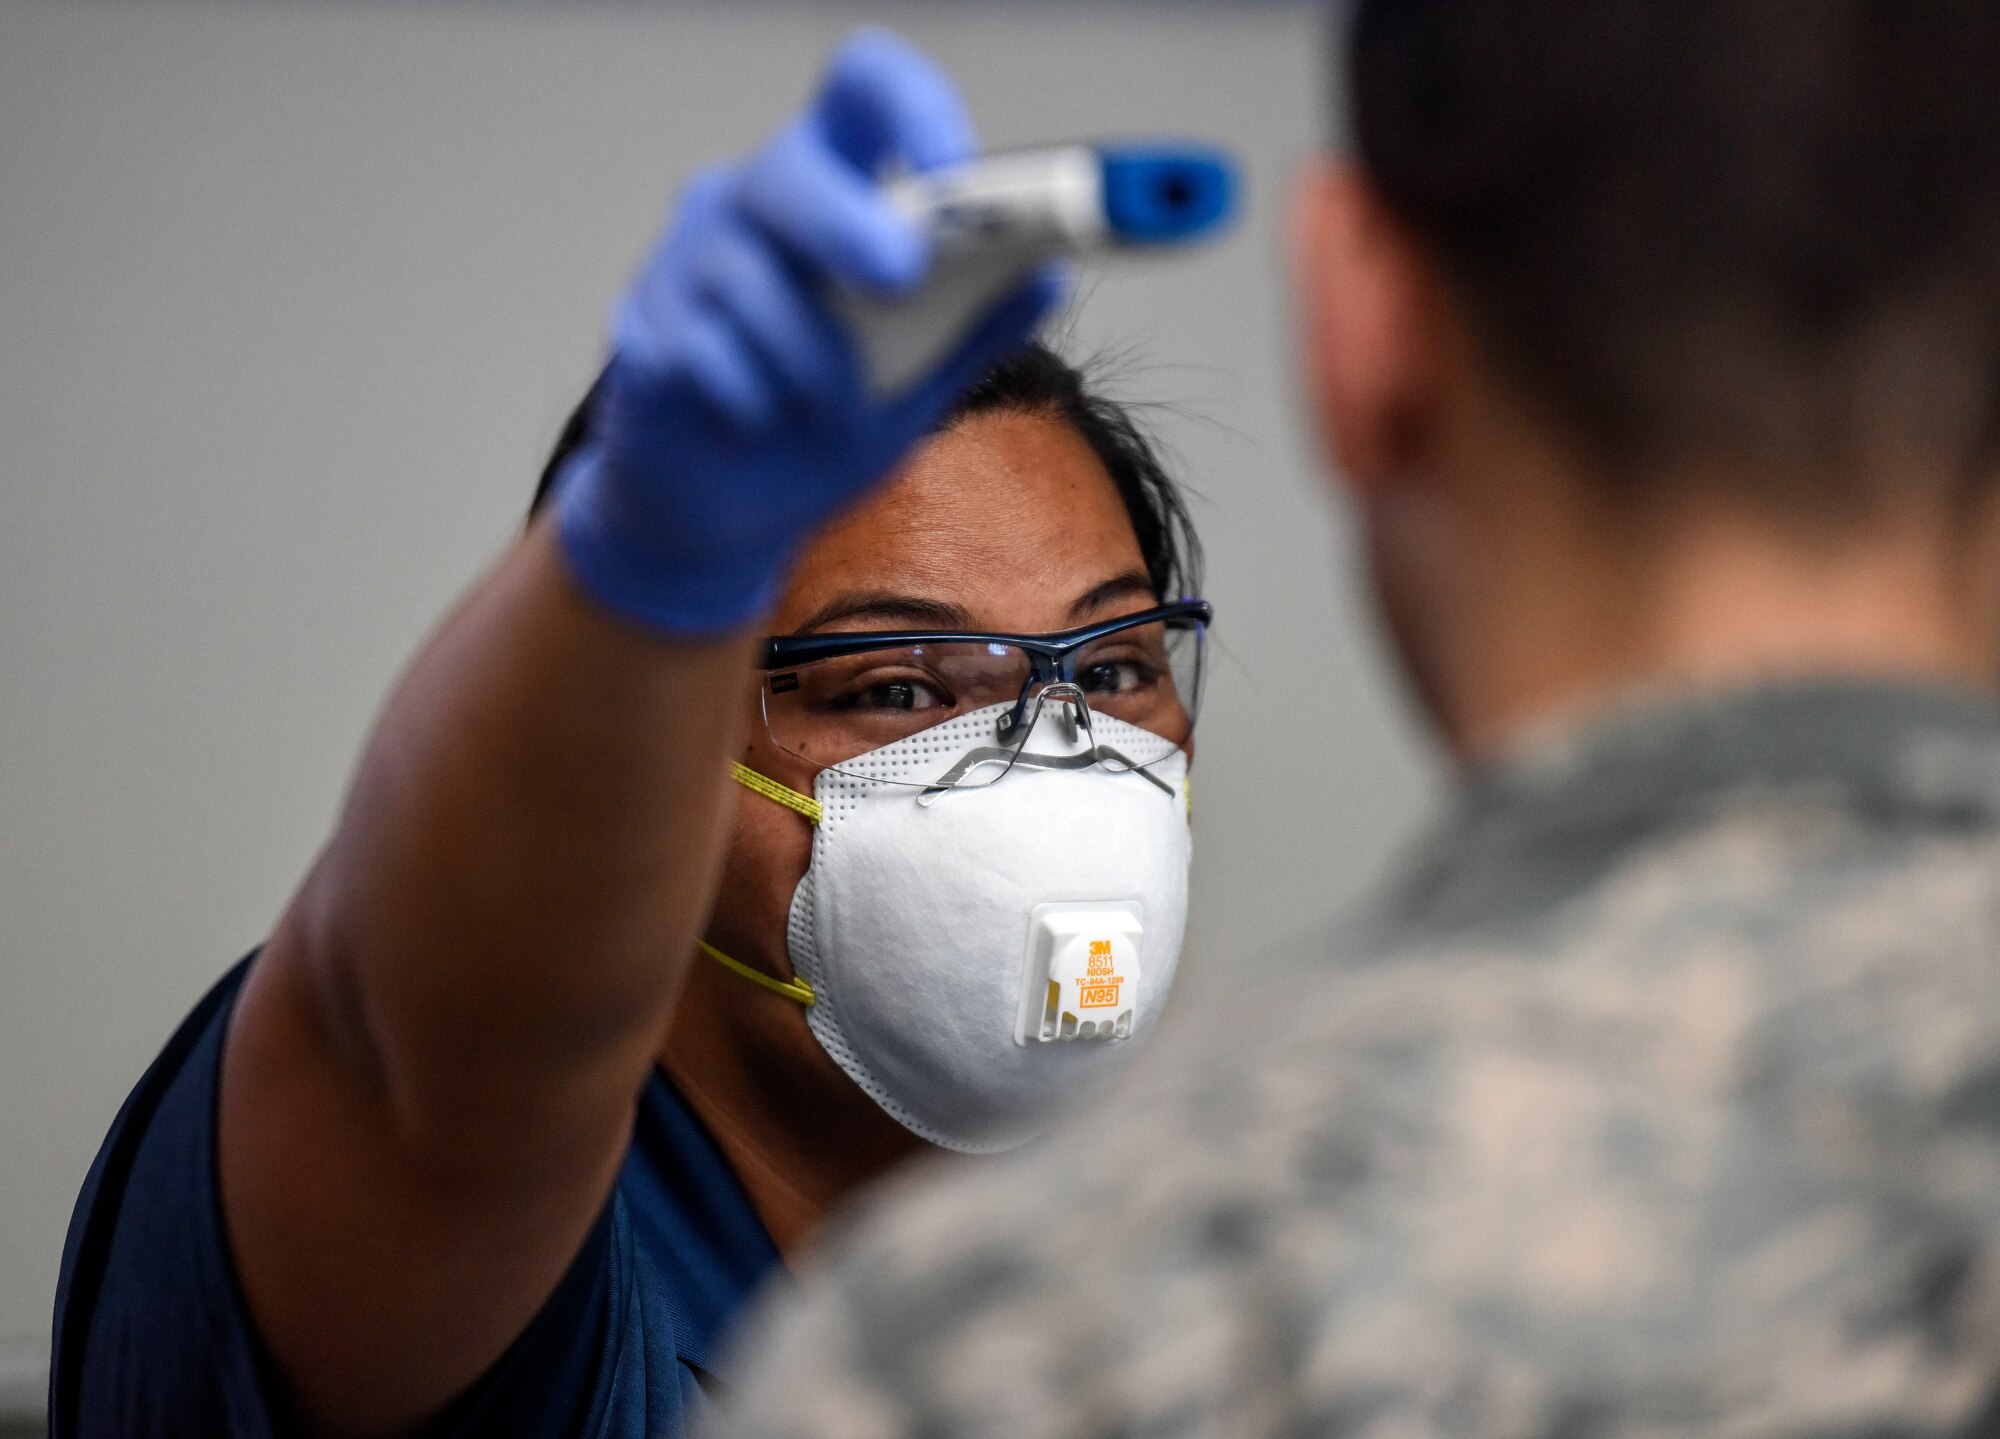 Kuhina Talimalie, 735th Air Mobility Squadron passenger service and baggage agent, tests a no-touch thermometer on an U.S. Air Force Airman at the Air Mobility Command Passenger Terminal at Joint Base Pearl Harbor-Hickam, Hawaii, March 25, 2020.
Passenger terminal Airmen are screening passengers for fevers to help mitigate the spread of COVID-19.

 (U.S. Air Force photo by Tech. Sgt. Anthony Nelson Jr.)